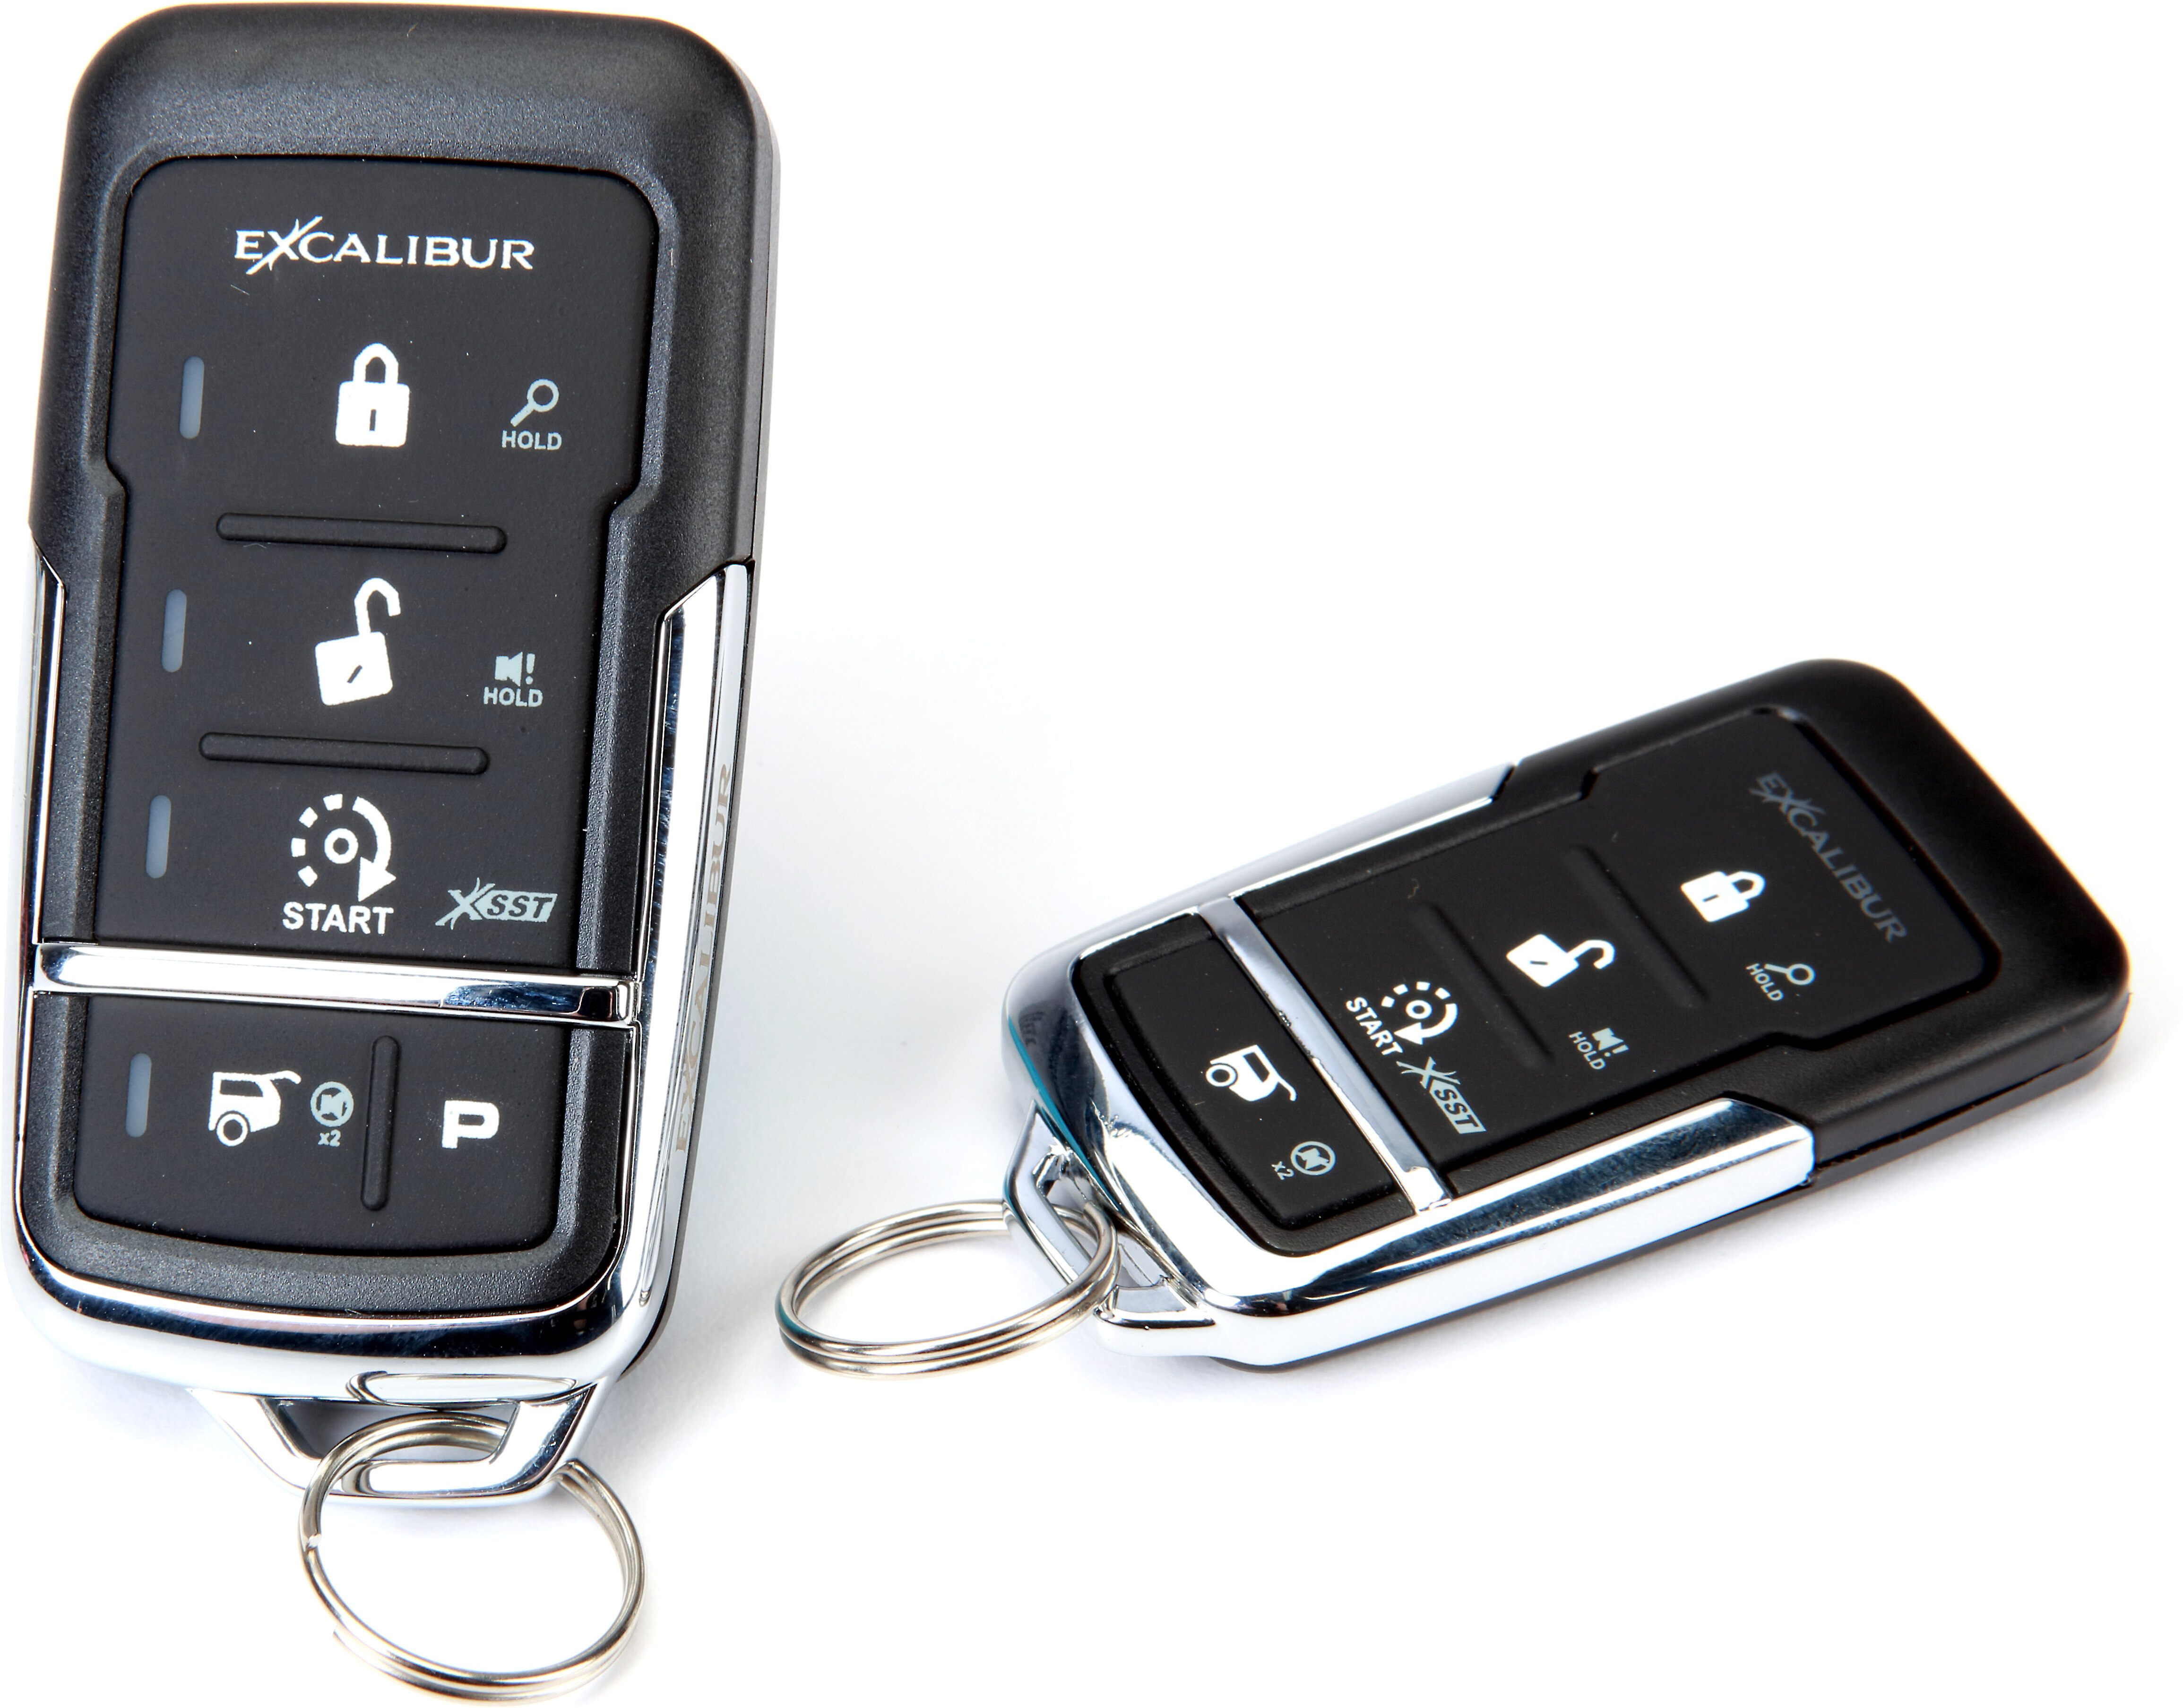 Excalibur Rs 475 3d 4 Button 2 Way Remote Start And Keyless Entry System Up To 3000 Foot Range At Crutchfield